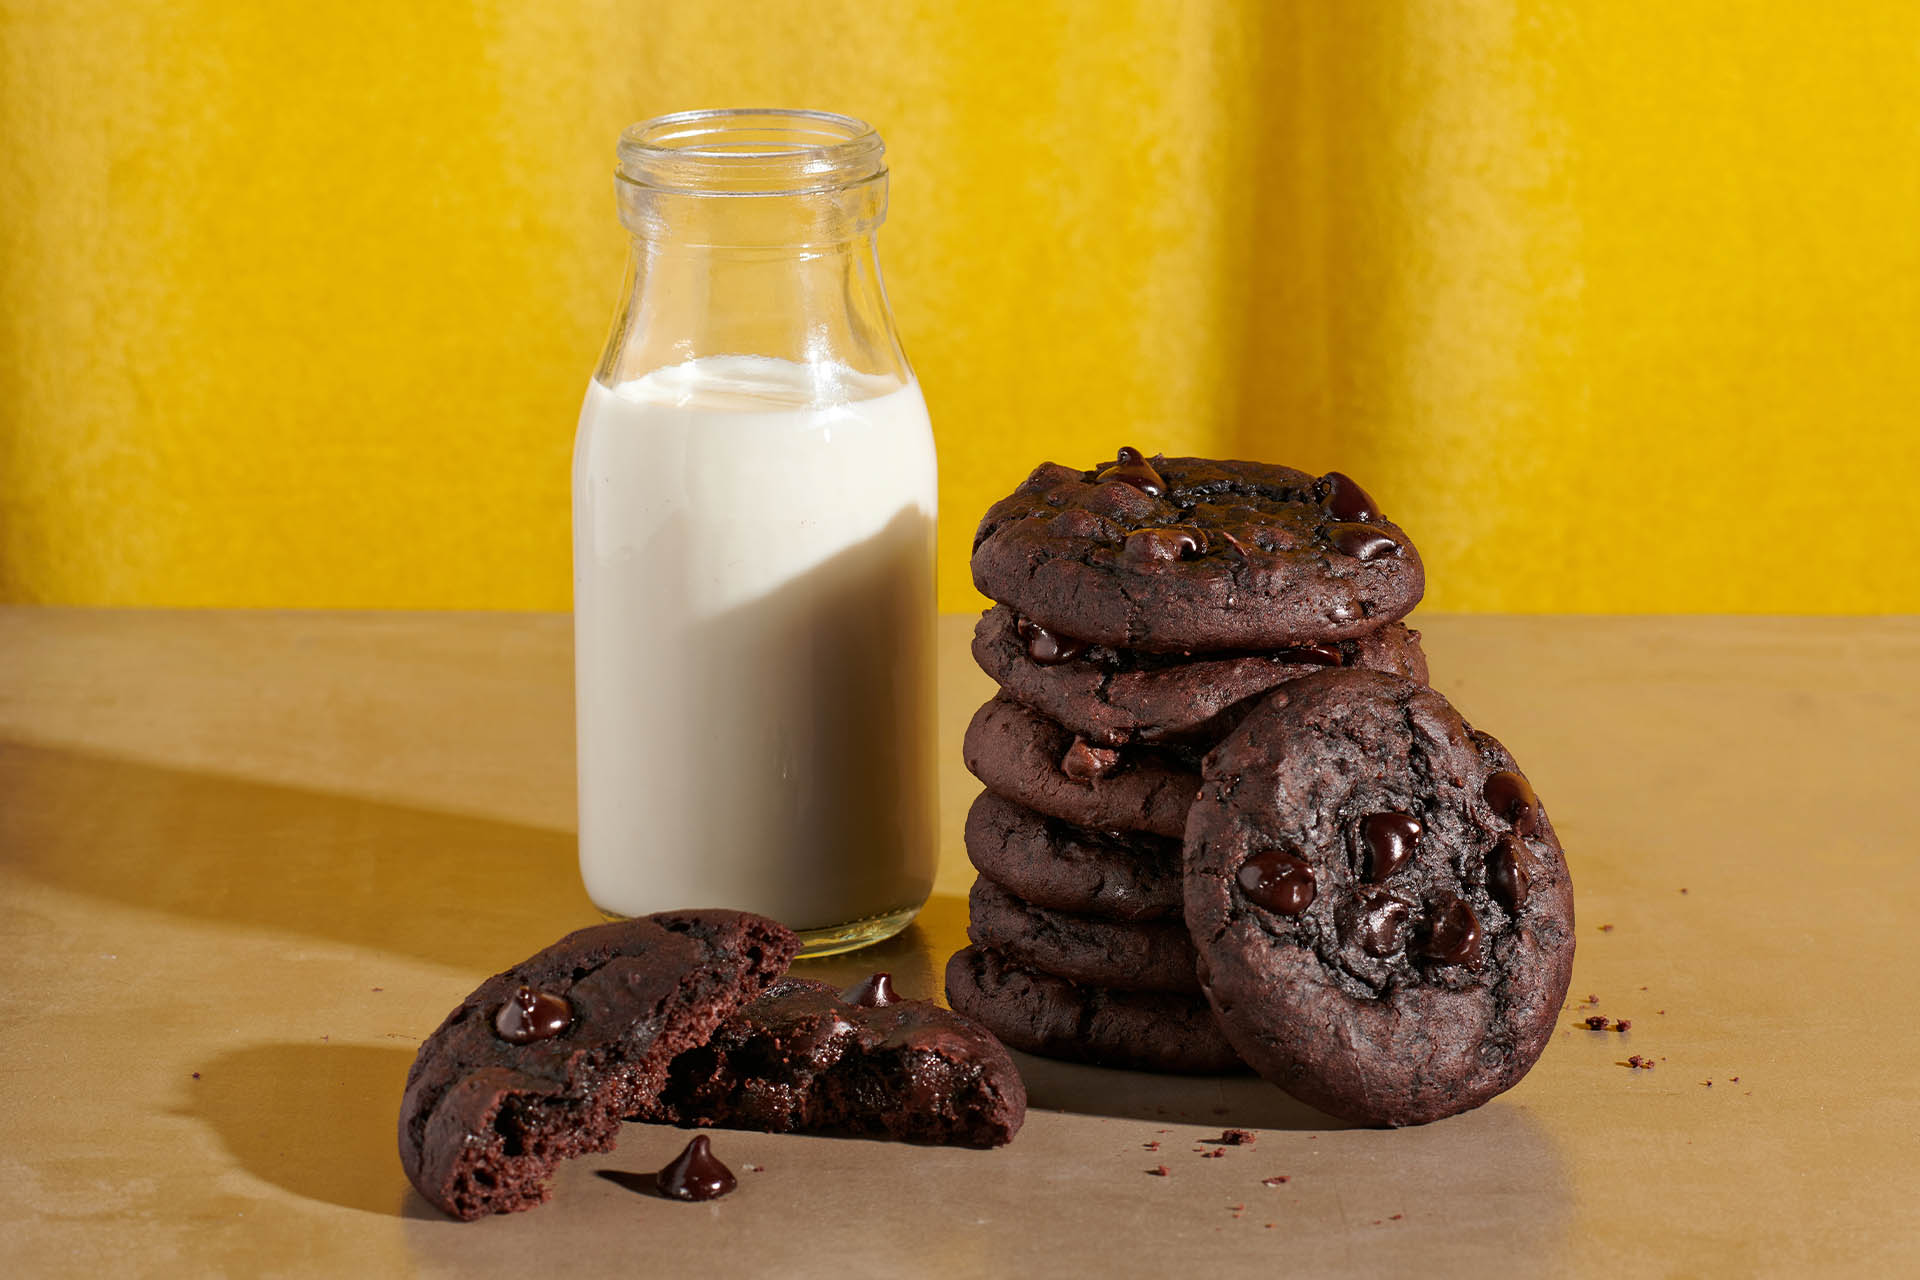 Stack of chocolate fudge and black bean cookies with a glass of milk.